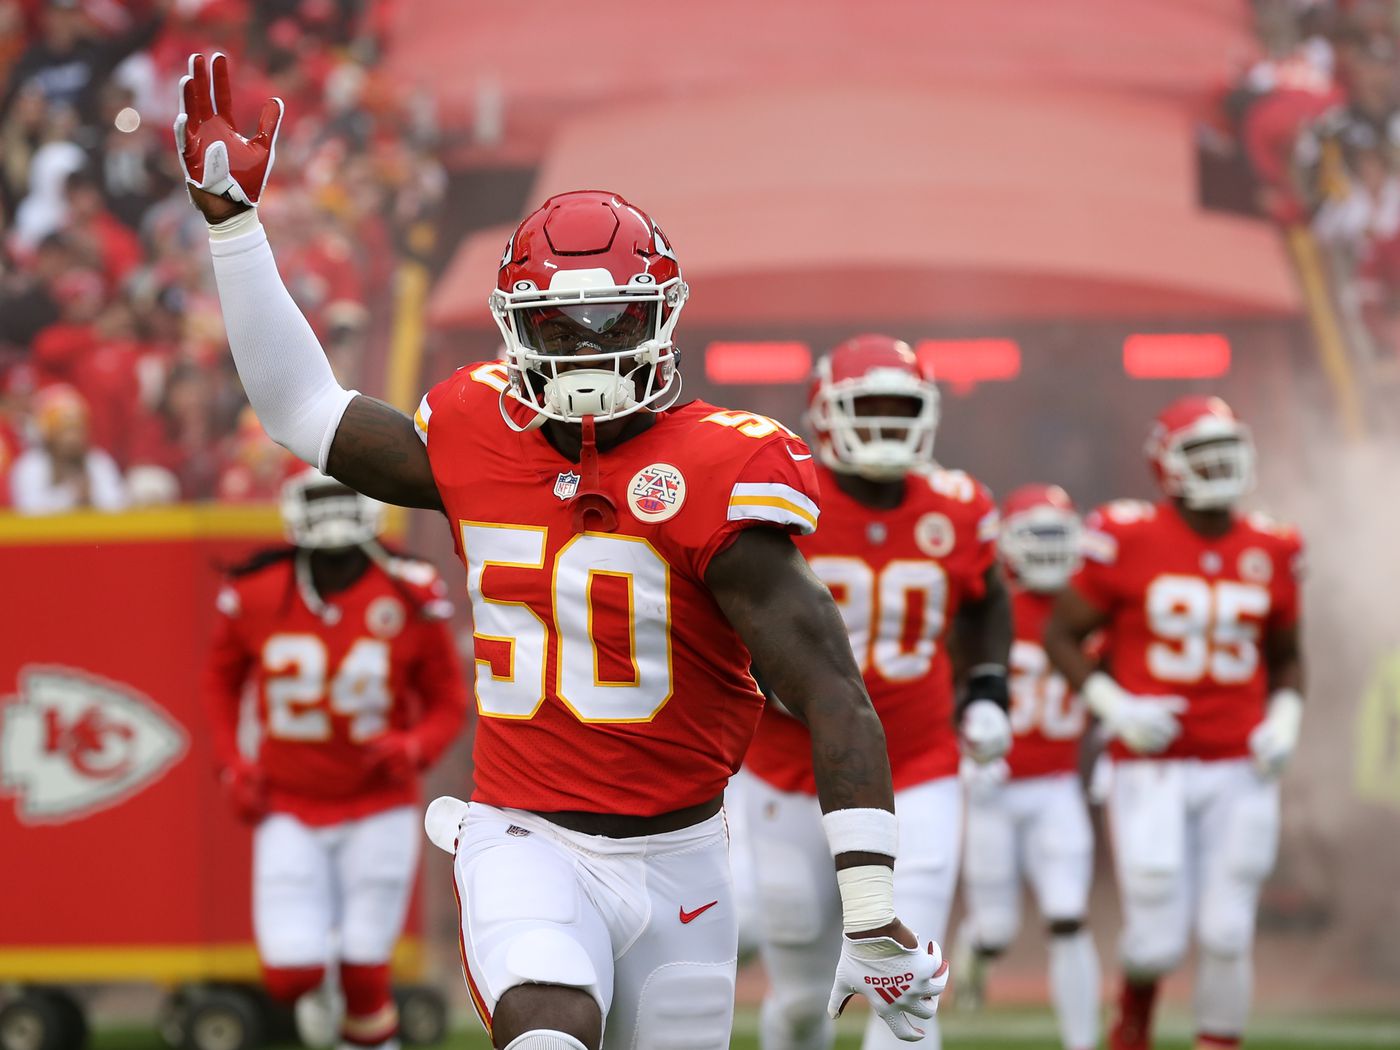 Kc Schedule 2022 Chiefs 2022 Nfl Schedule: Strength Of Home And Away Opponents - Arrowhead  Pride